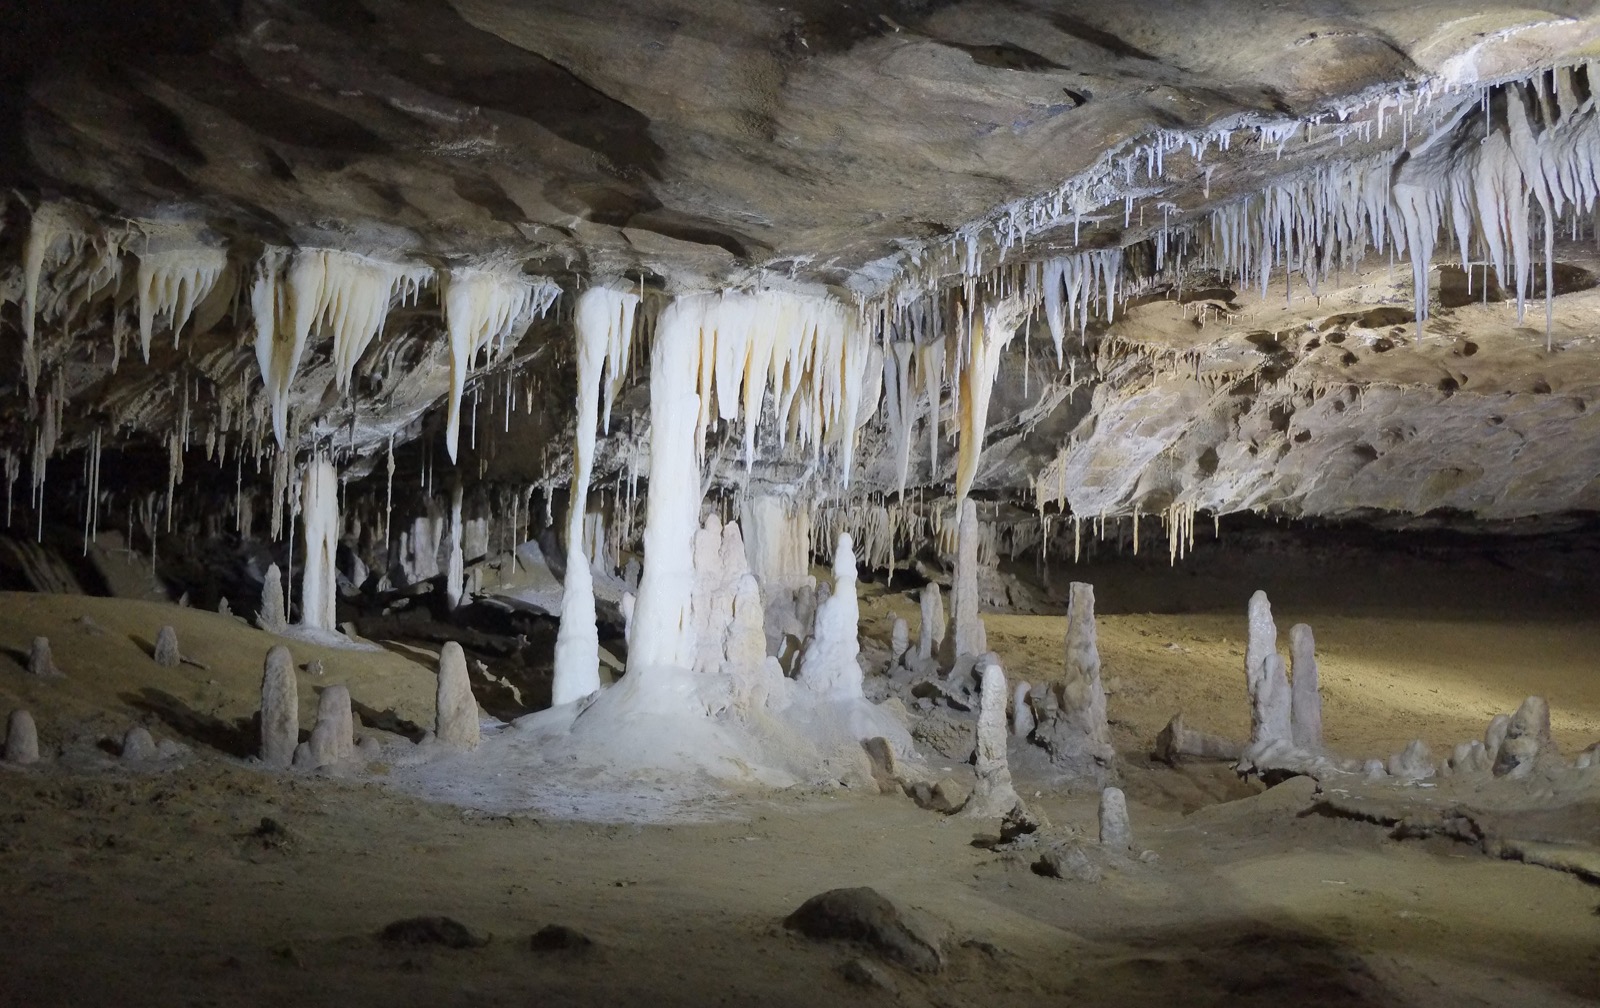 This 25-Question Mixed Trivia Quiz Was Made to Prevent You from Passing. Can You Beat the Odds? Cavern Full Of Stalactites And Stalagmites In Metro Cave Te Ananui Cave